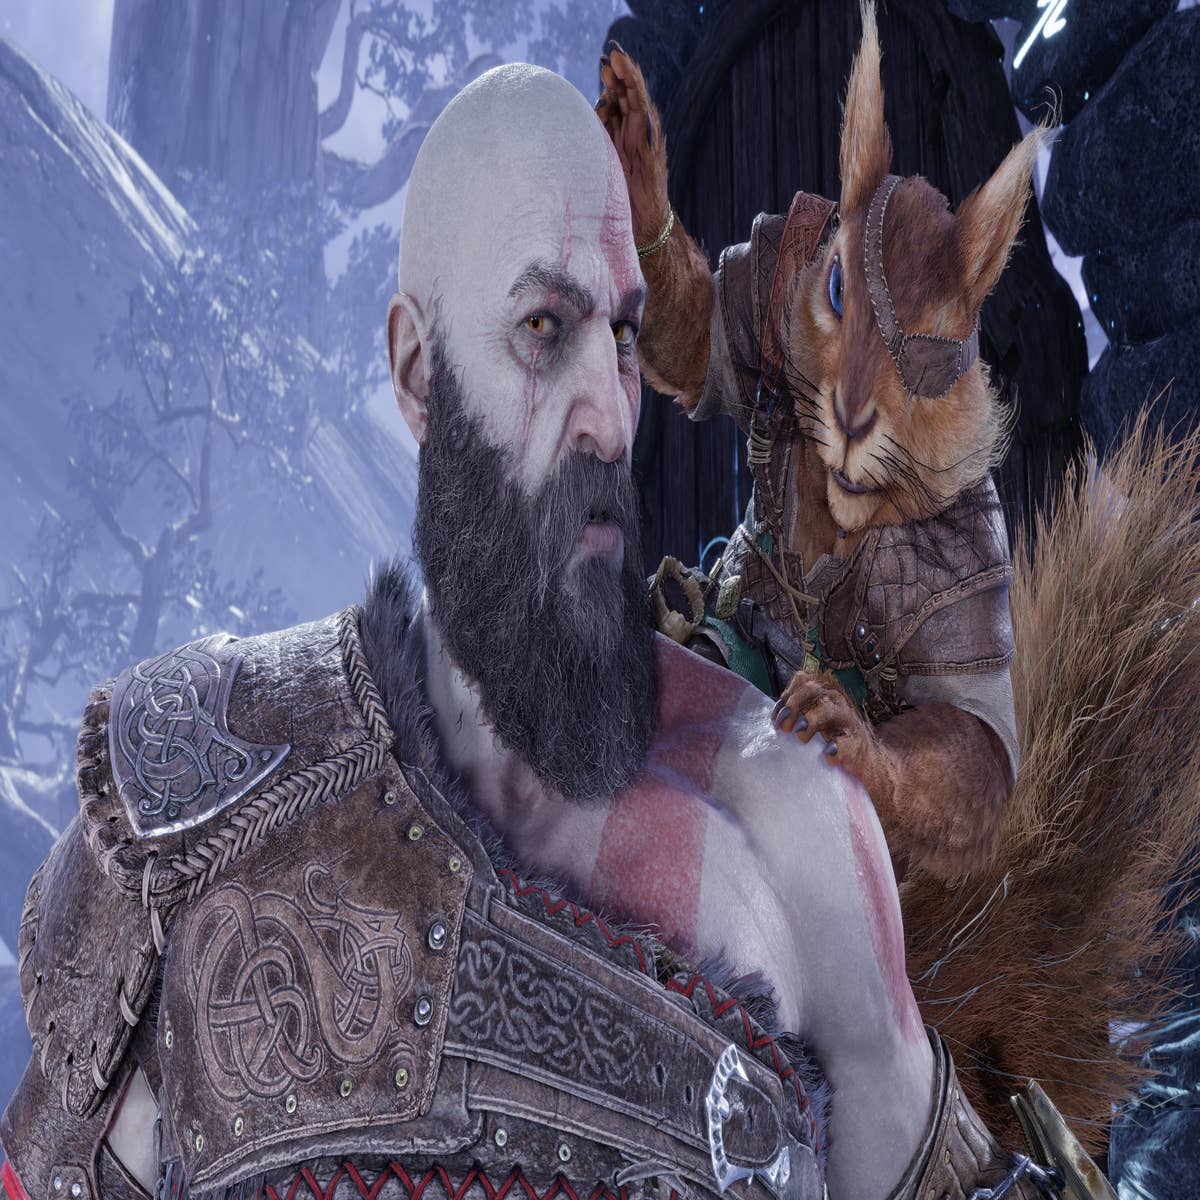 There's just no pleasing some people : r/GodofWar